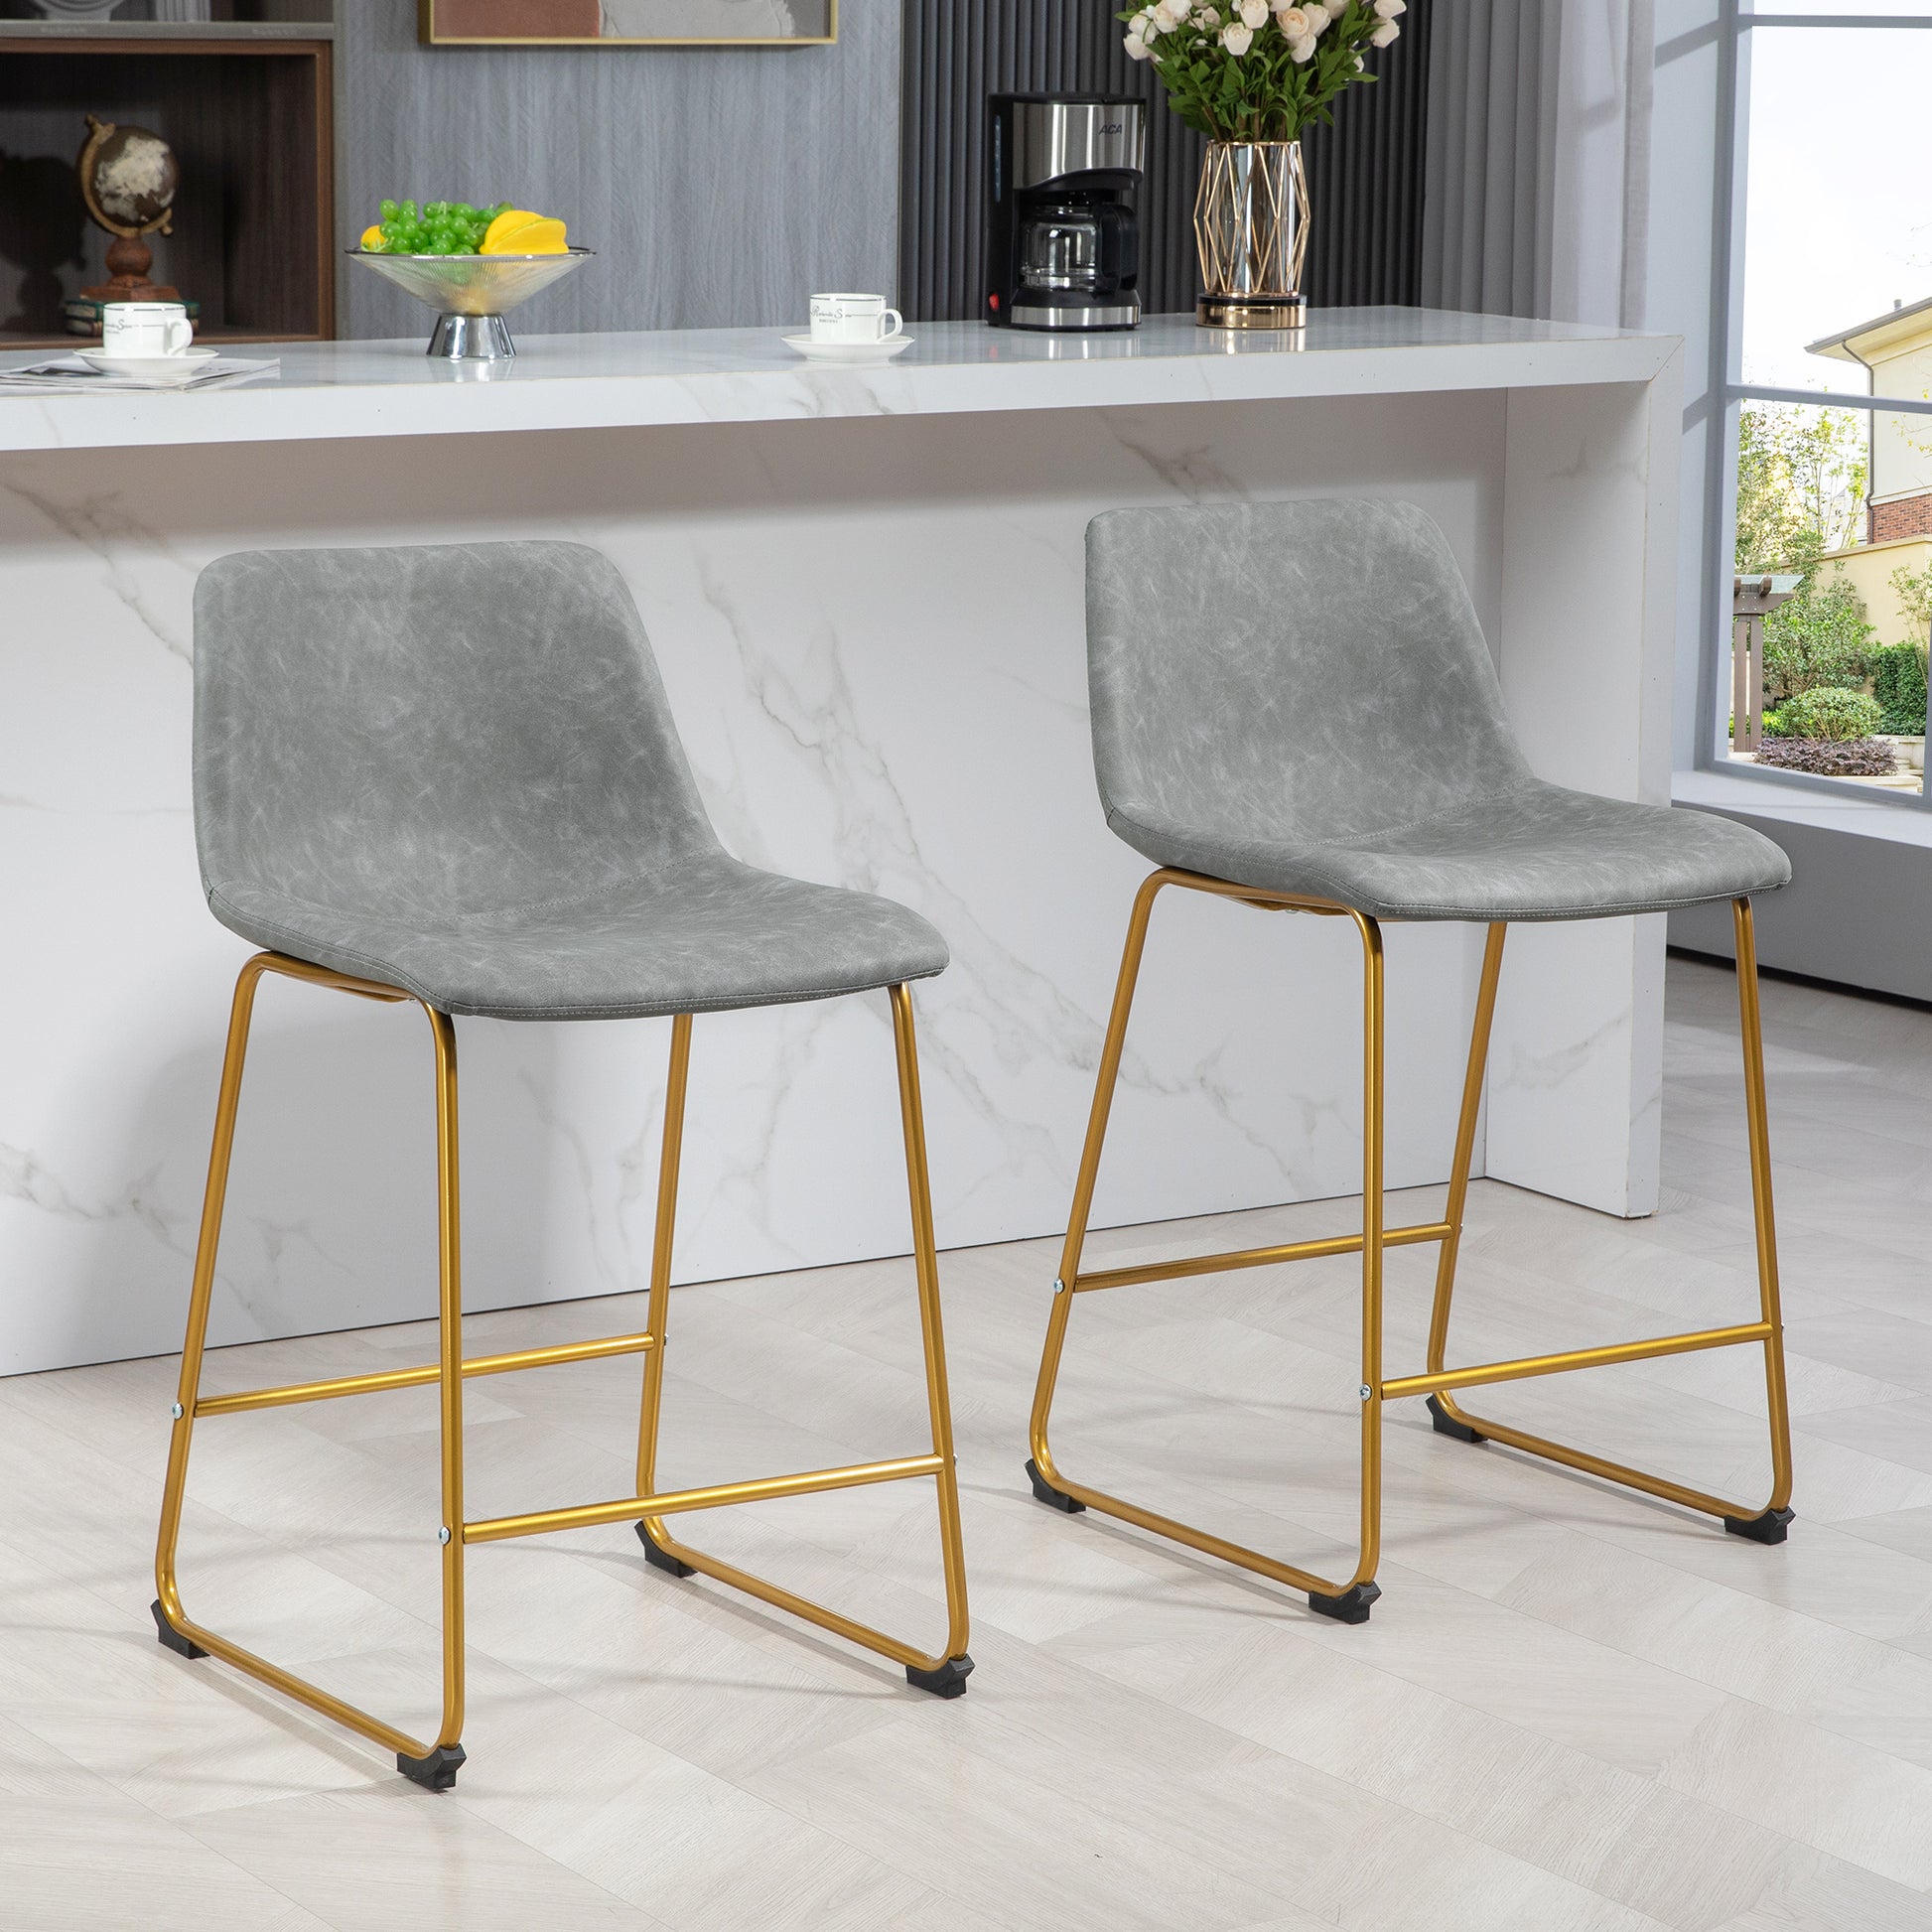 Counter Height Stools Set of 2, PU Leather Upholstered Stools for Kitchen Island, Modern Bar Chairs, Light Grey at Gallery Canada